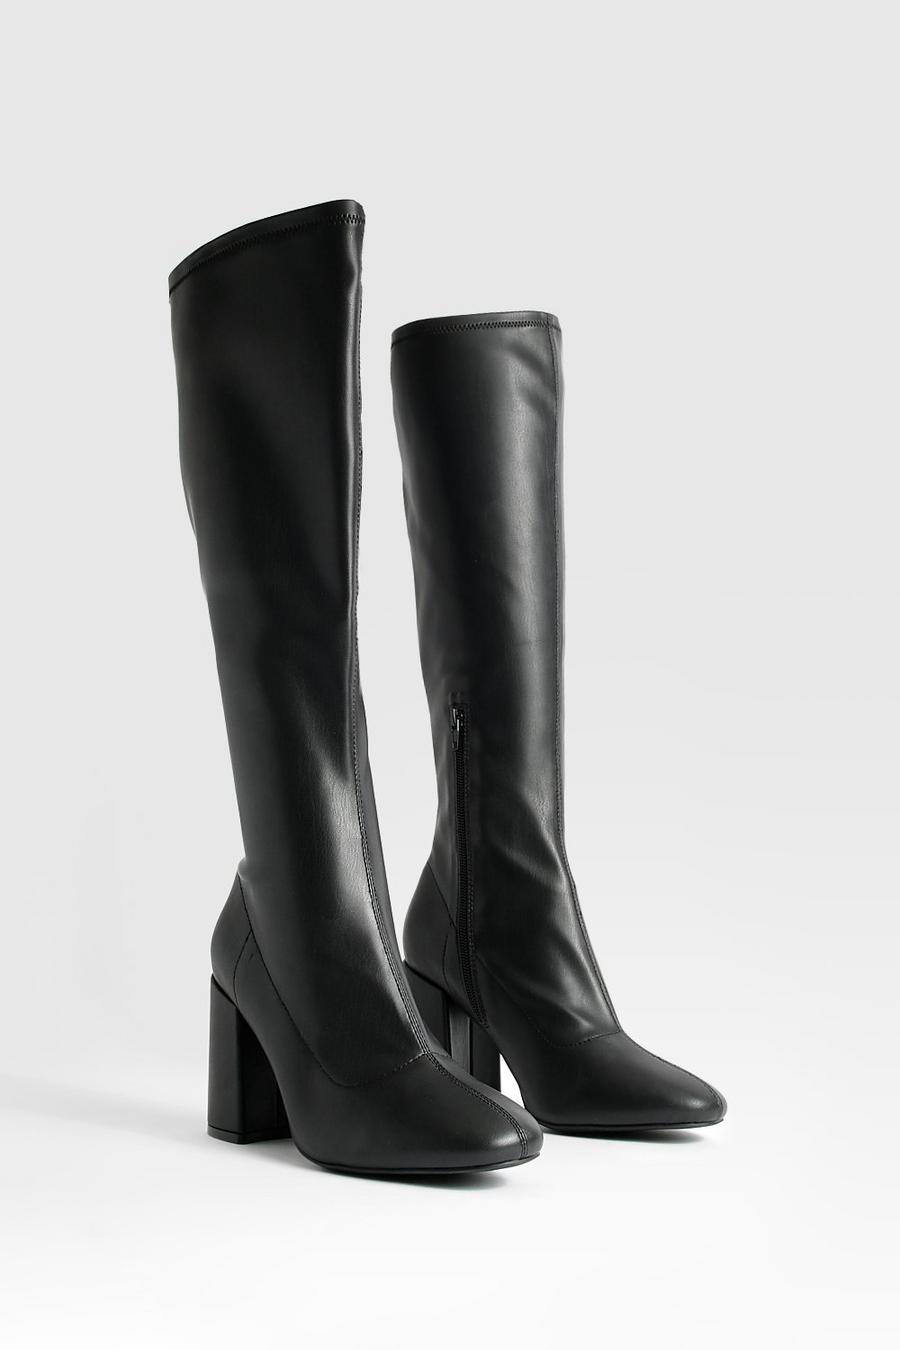 Black Wide Width Stretch Knee High Boots